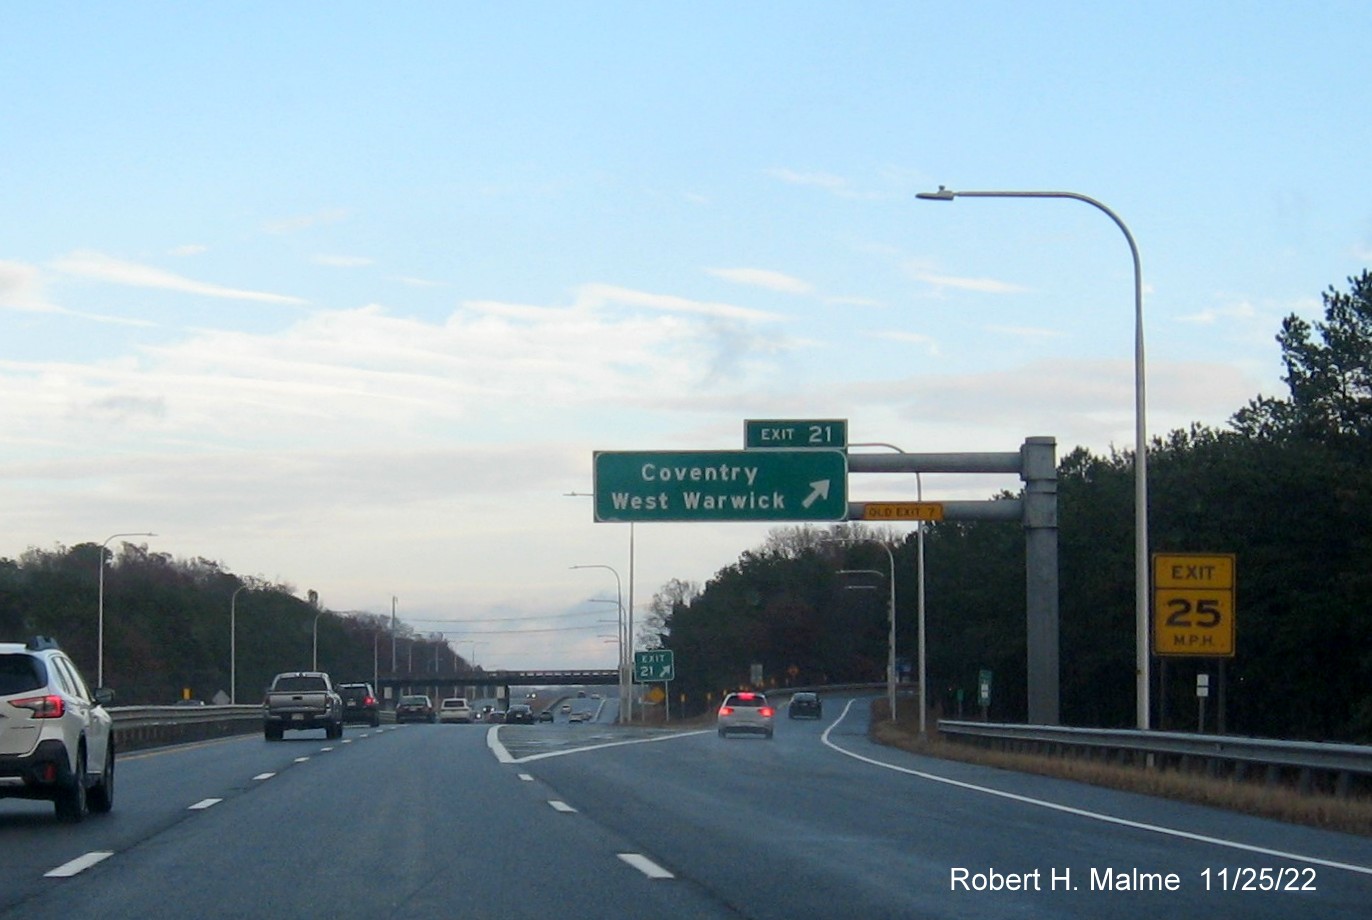 Image of overhead ramp sign for Coventry/West Warwick exit with new milepost based exit number and Old 
                                          Exit 7 sign on support post on I-95 North, November 2022